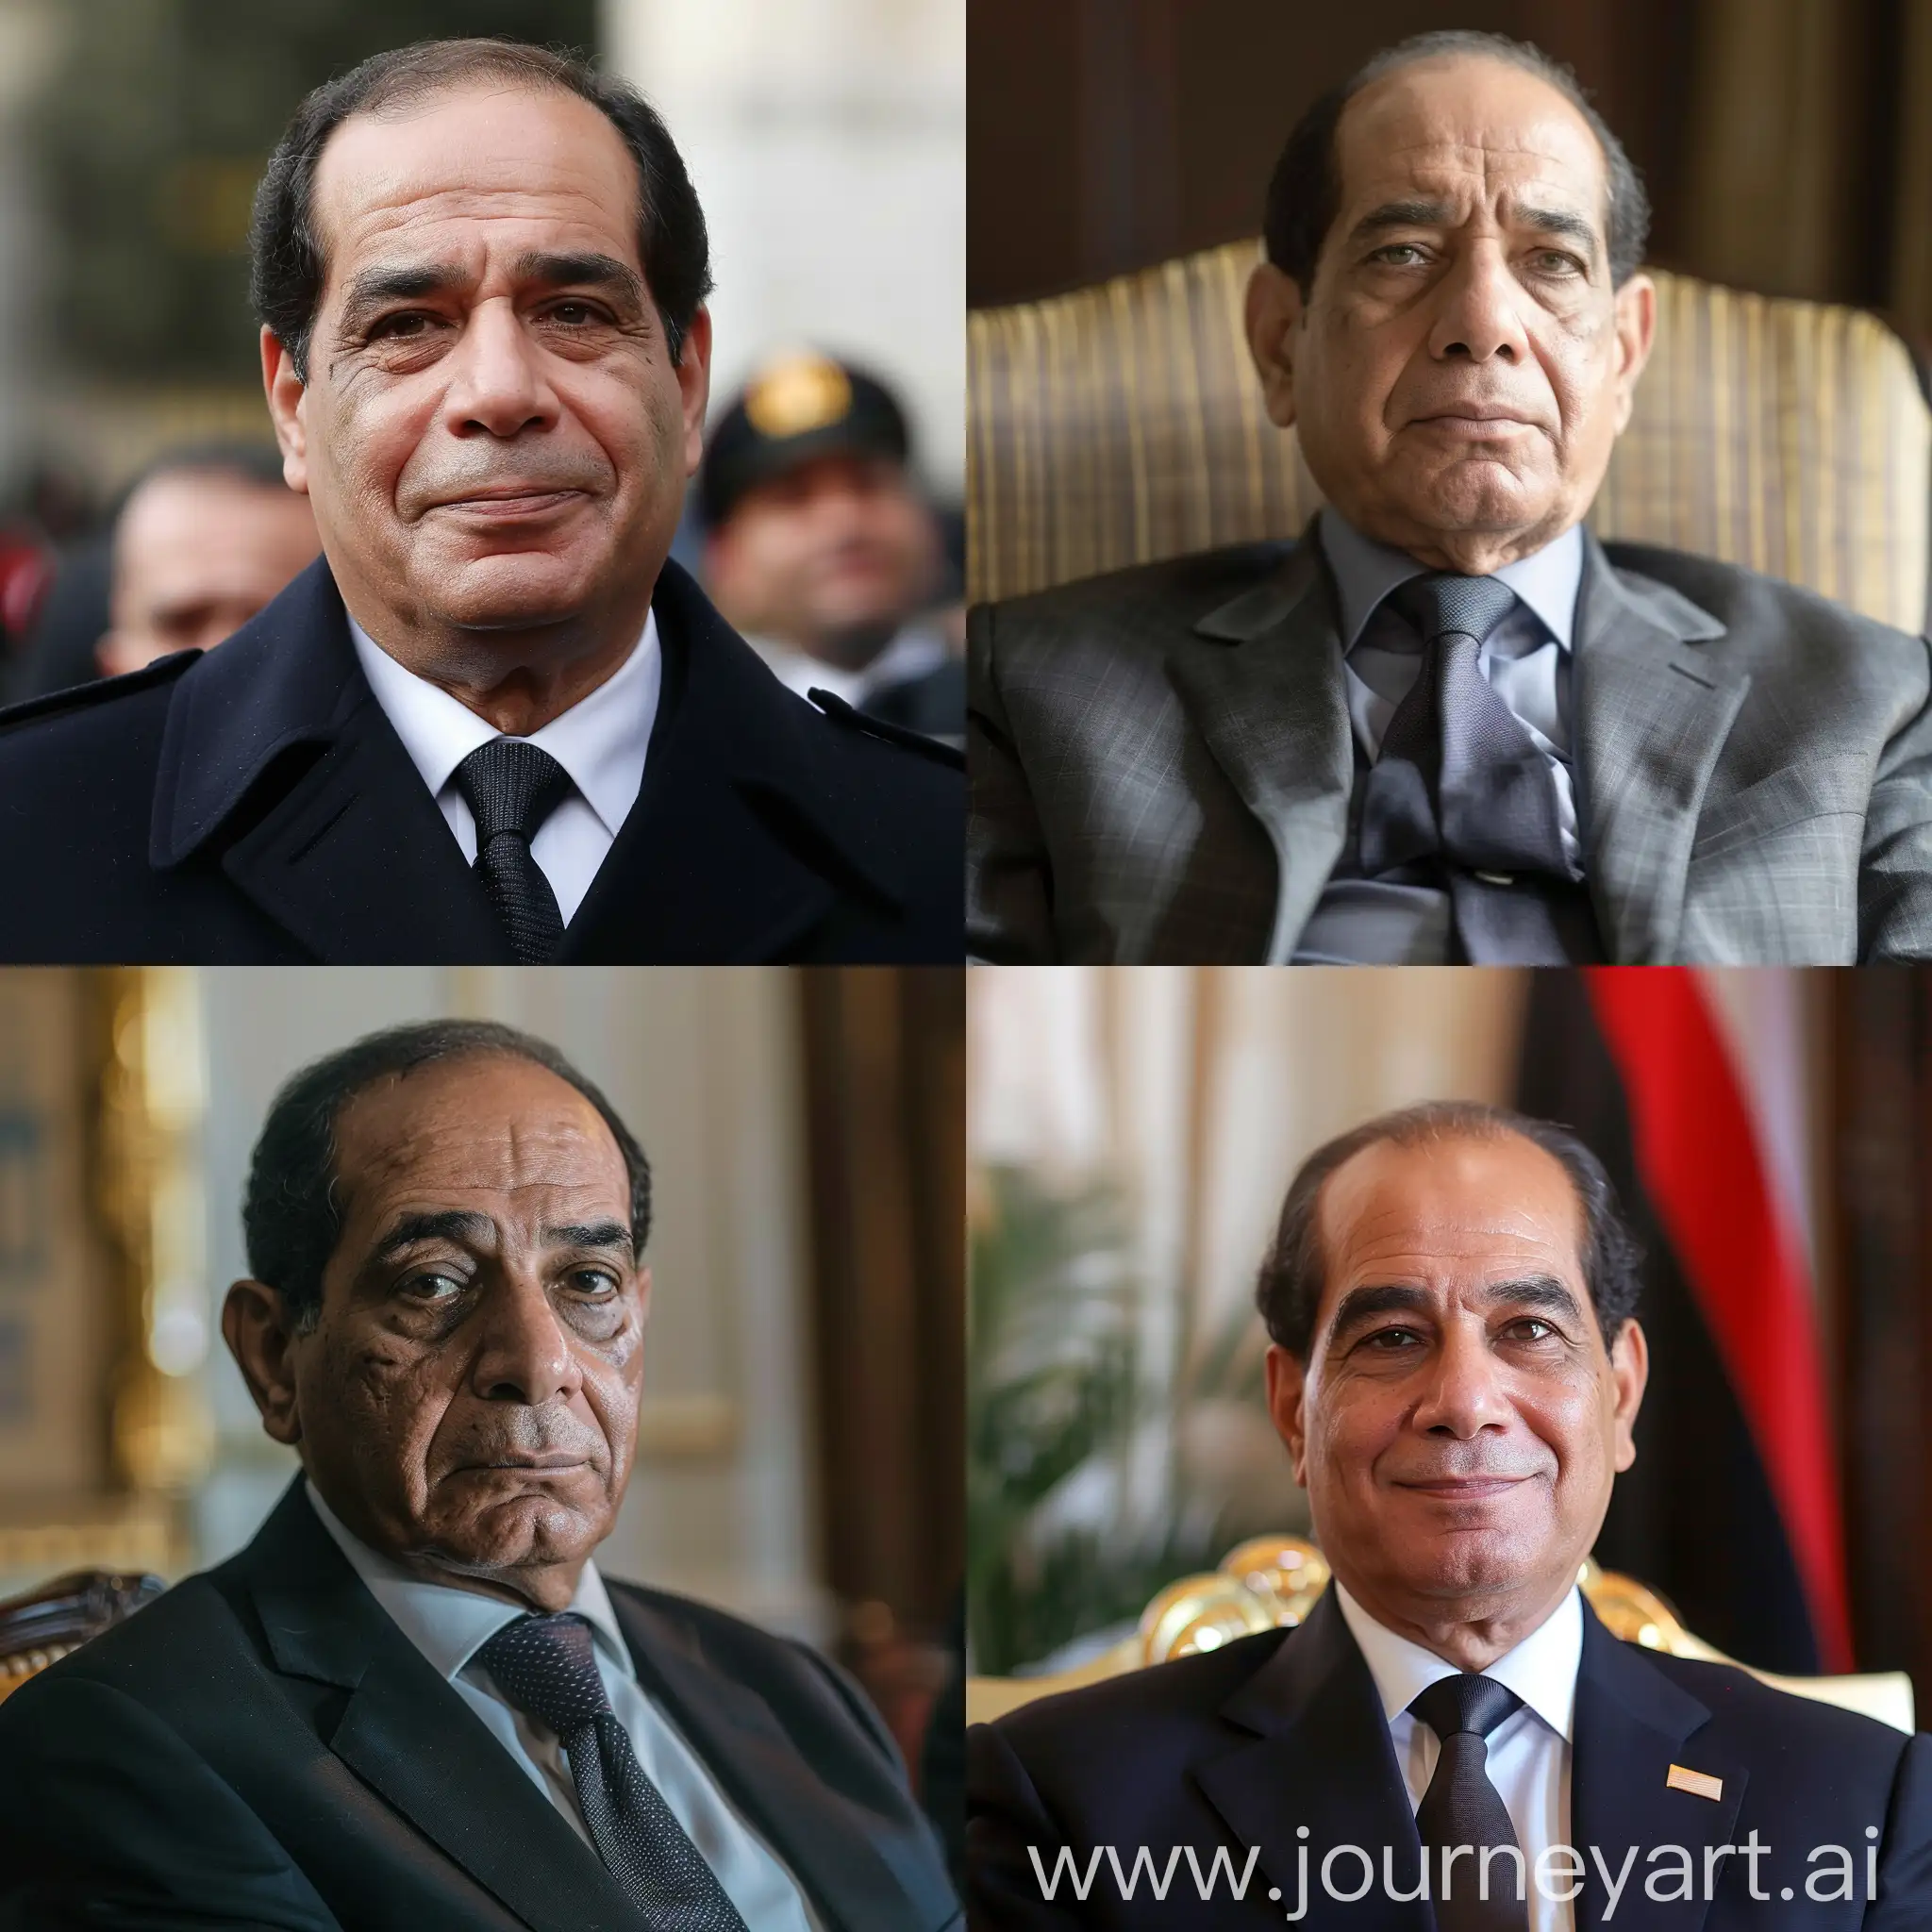 The President of Egypt suffers from Alzheimer's